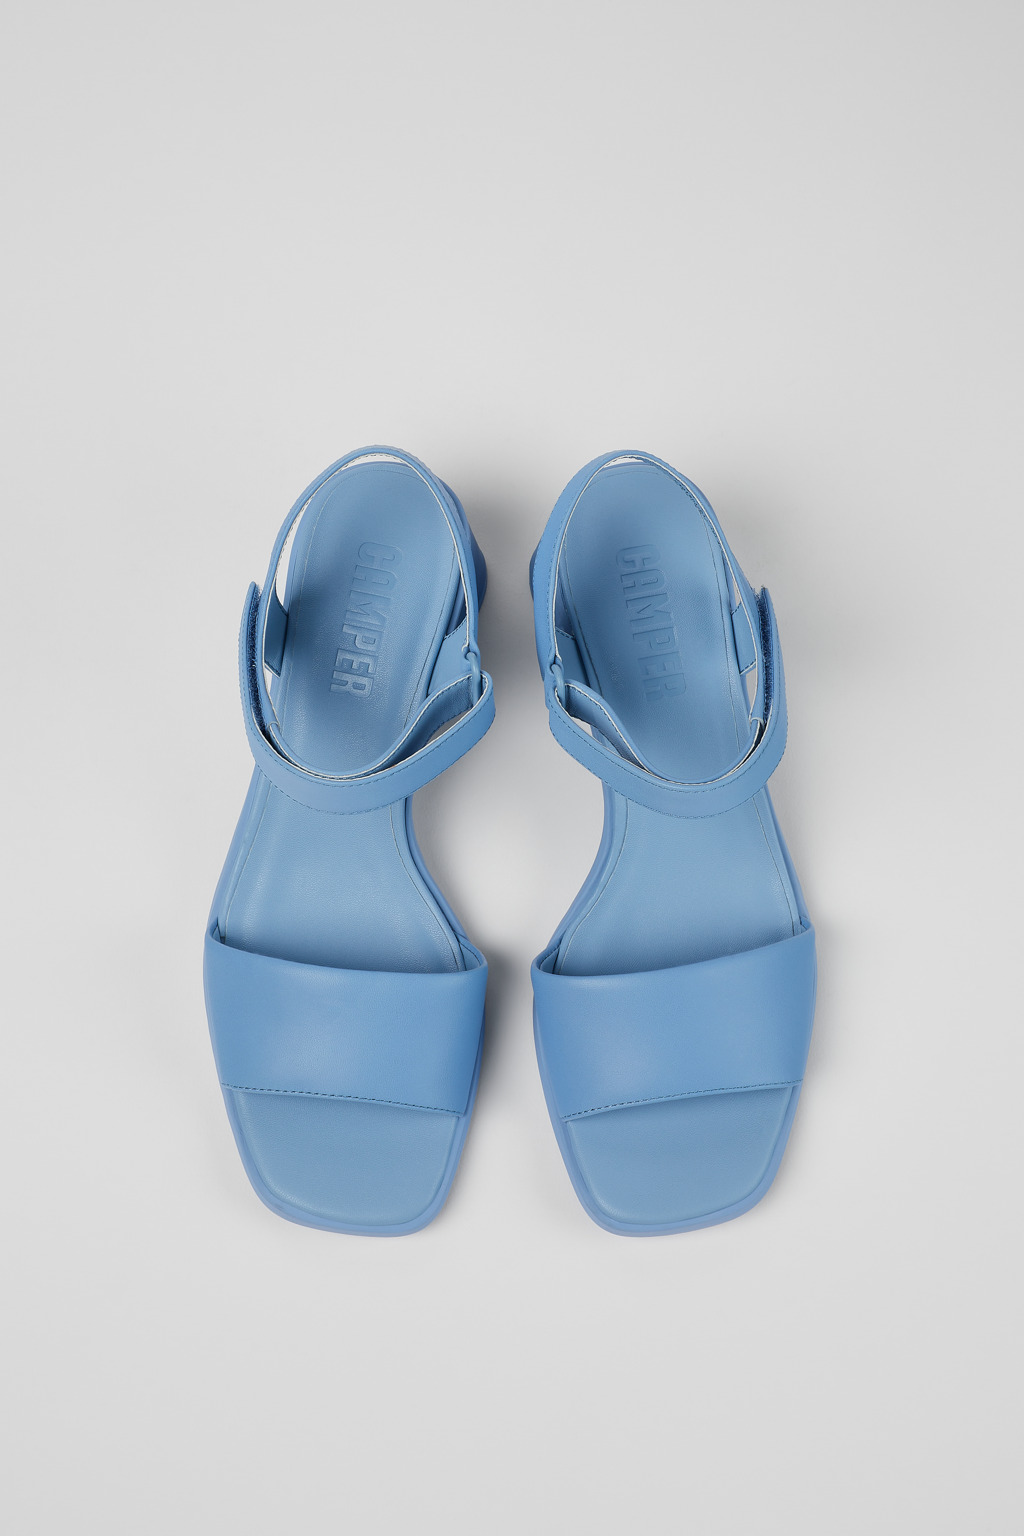 KIA Blue Sandals for Women - Spring/Summer collection - Camper USA